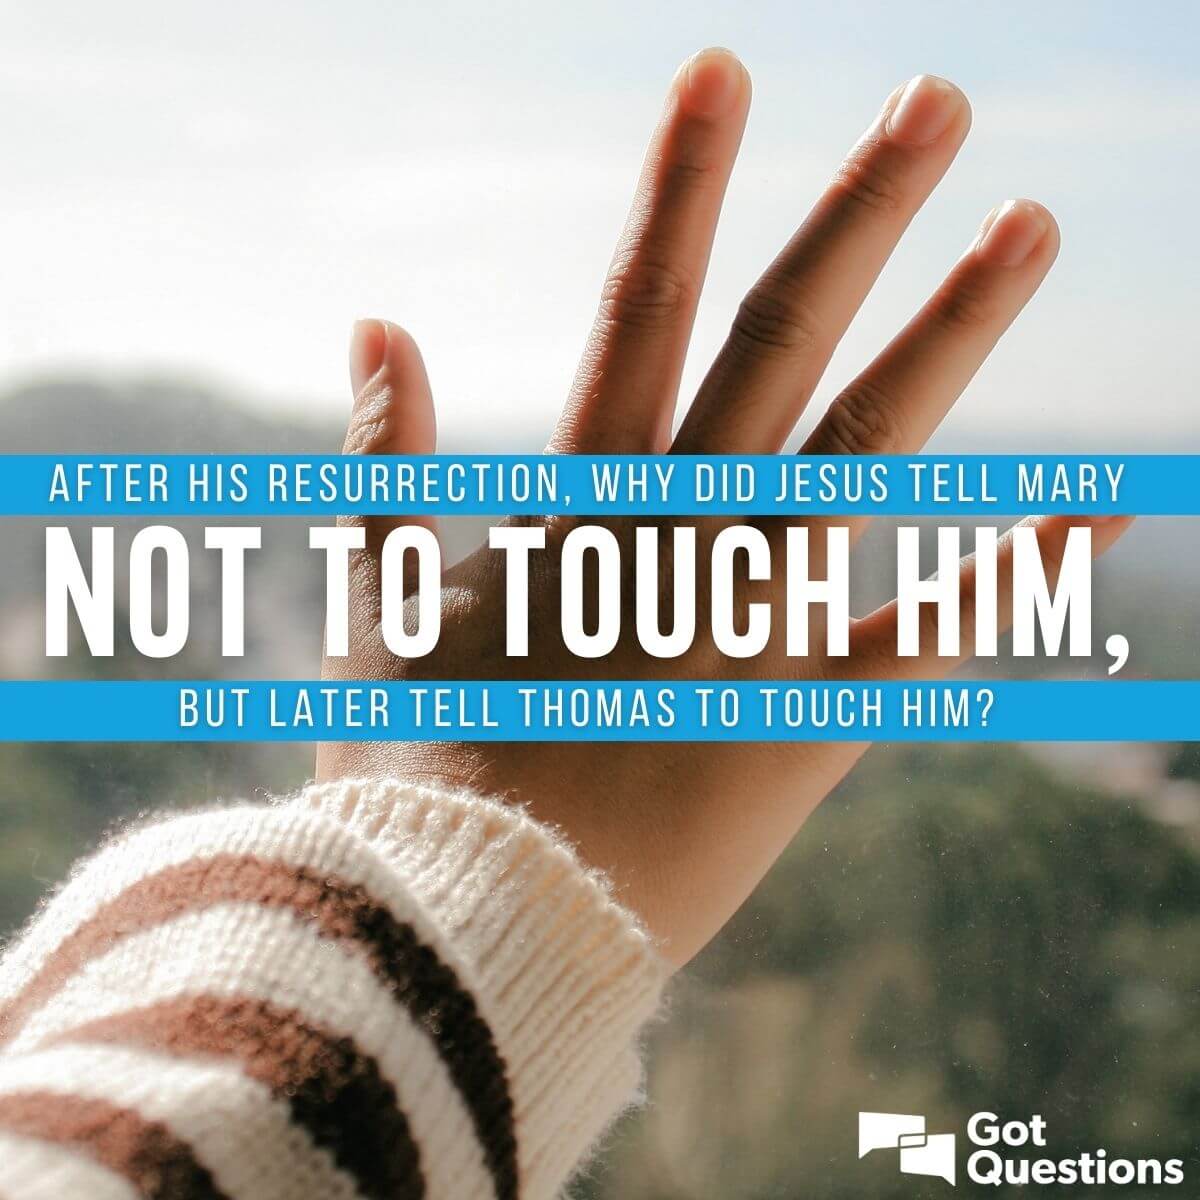 After His resurrection, why did Jesus tell Mary not to touch Him, but